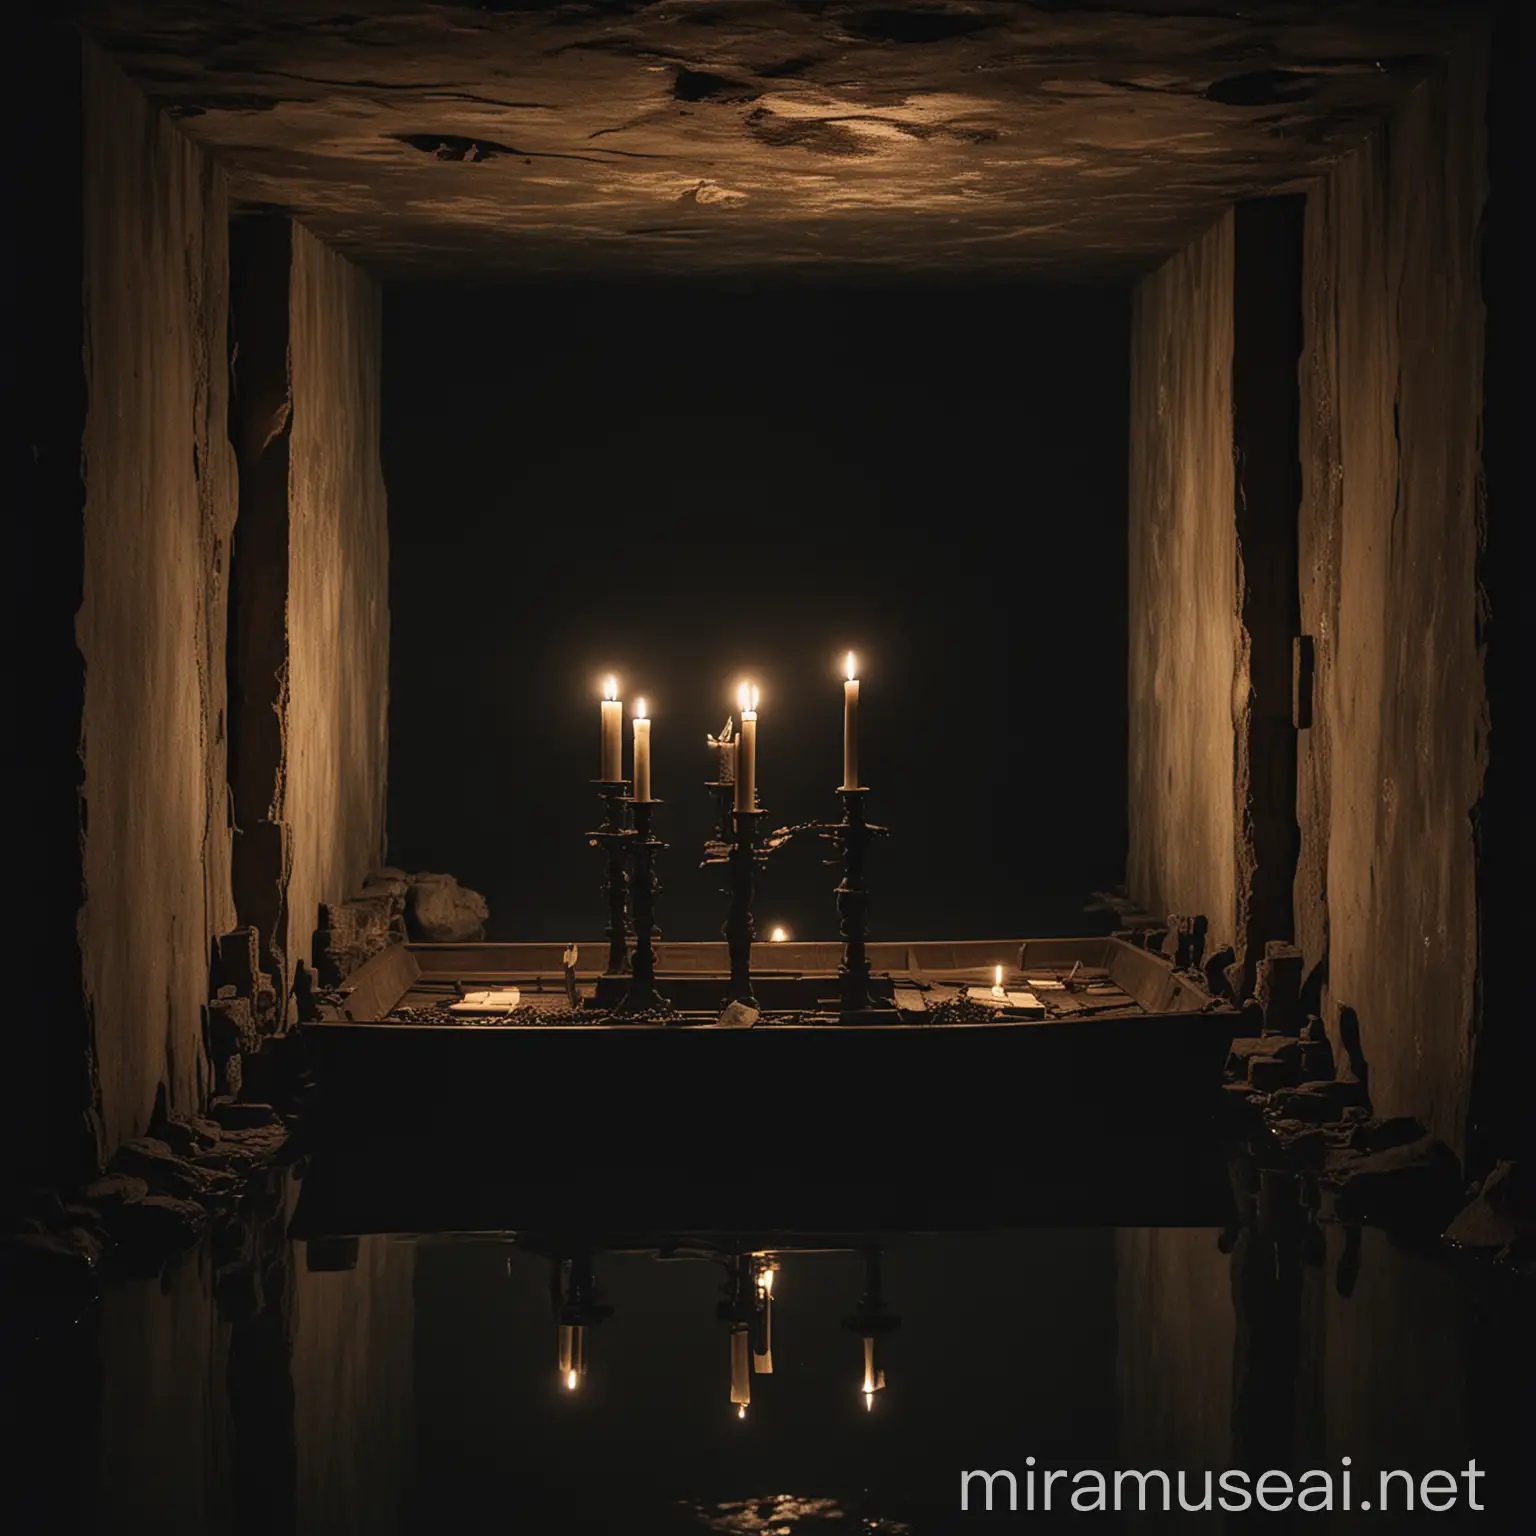 Enigmatic Lake Mysterious Altar and Silent Boat in Shadowy Chamber